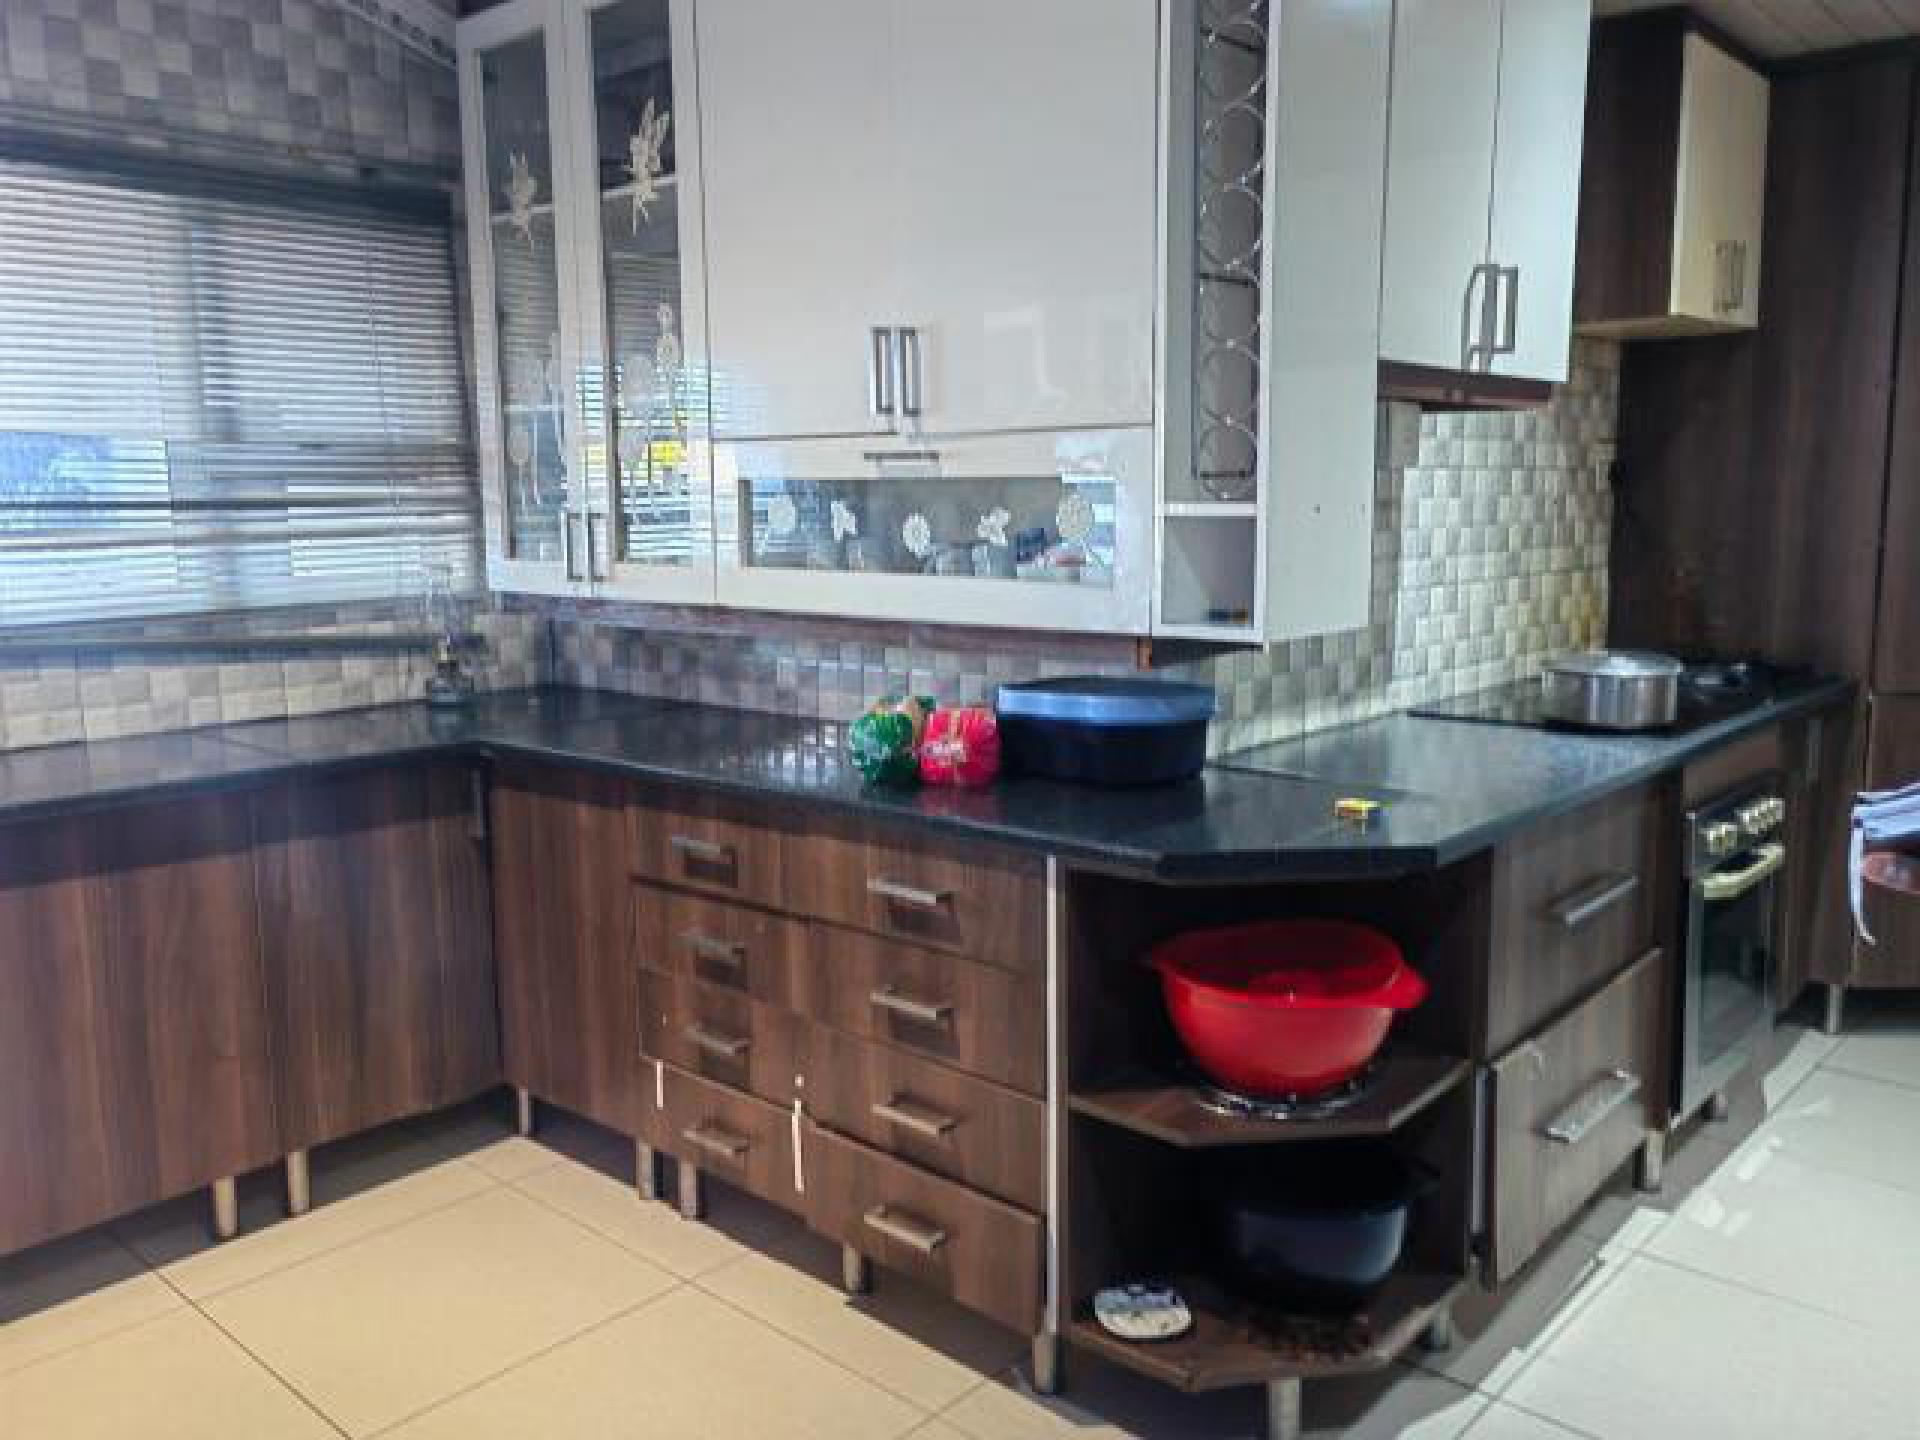 Kitchen of property in West Bank